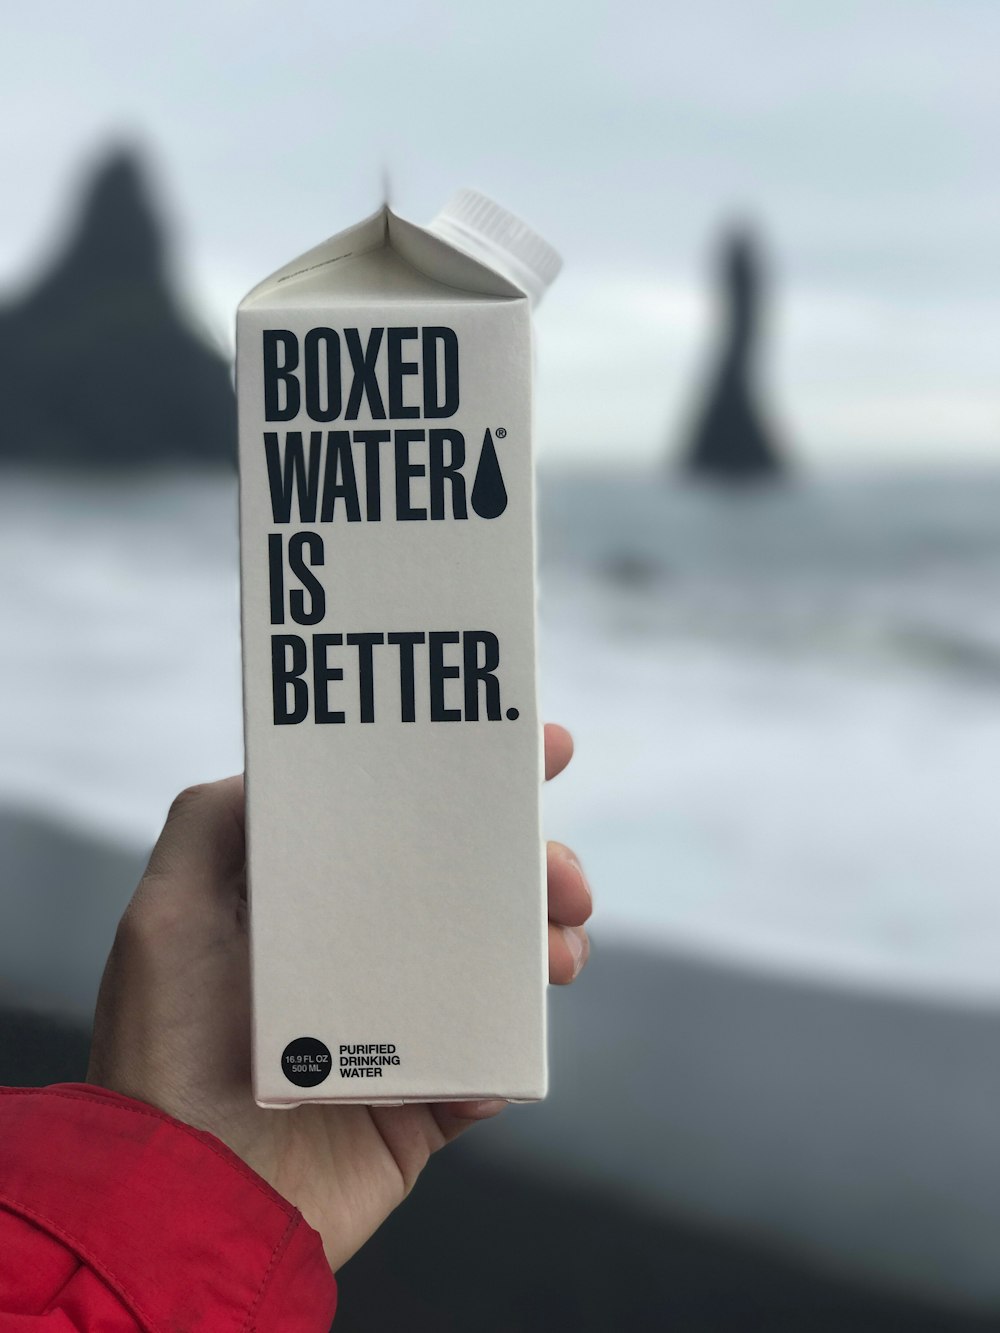 A Boxed Water carton is held in front of an Icelandic beach